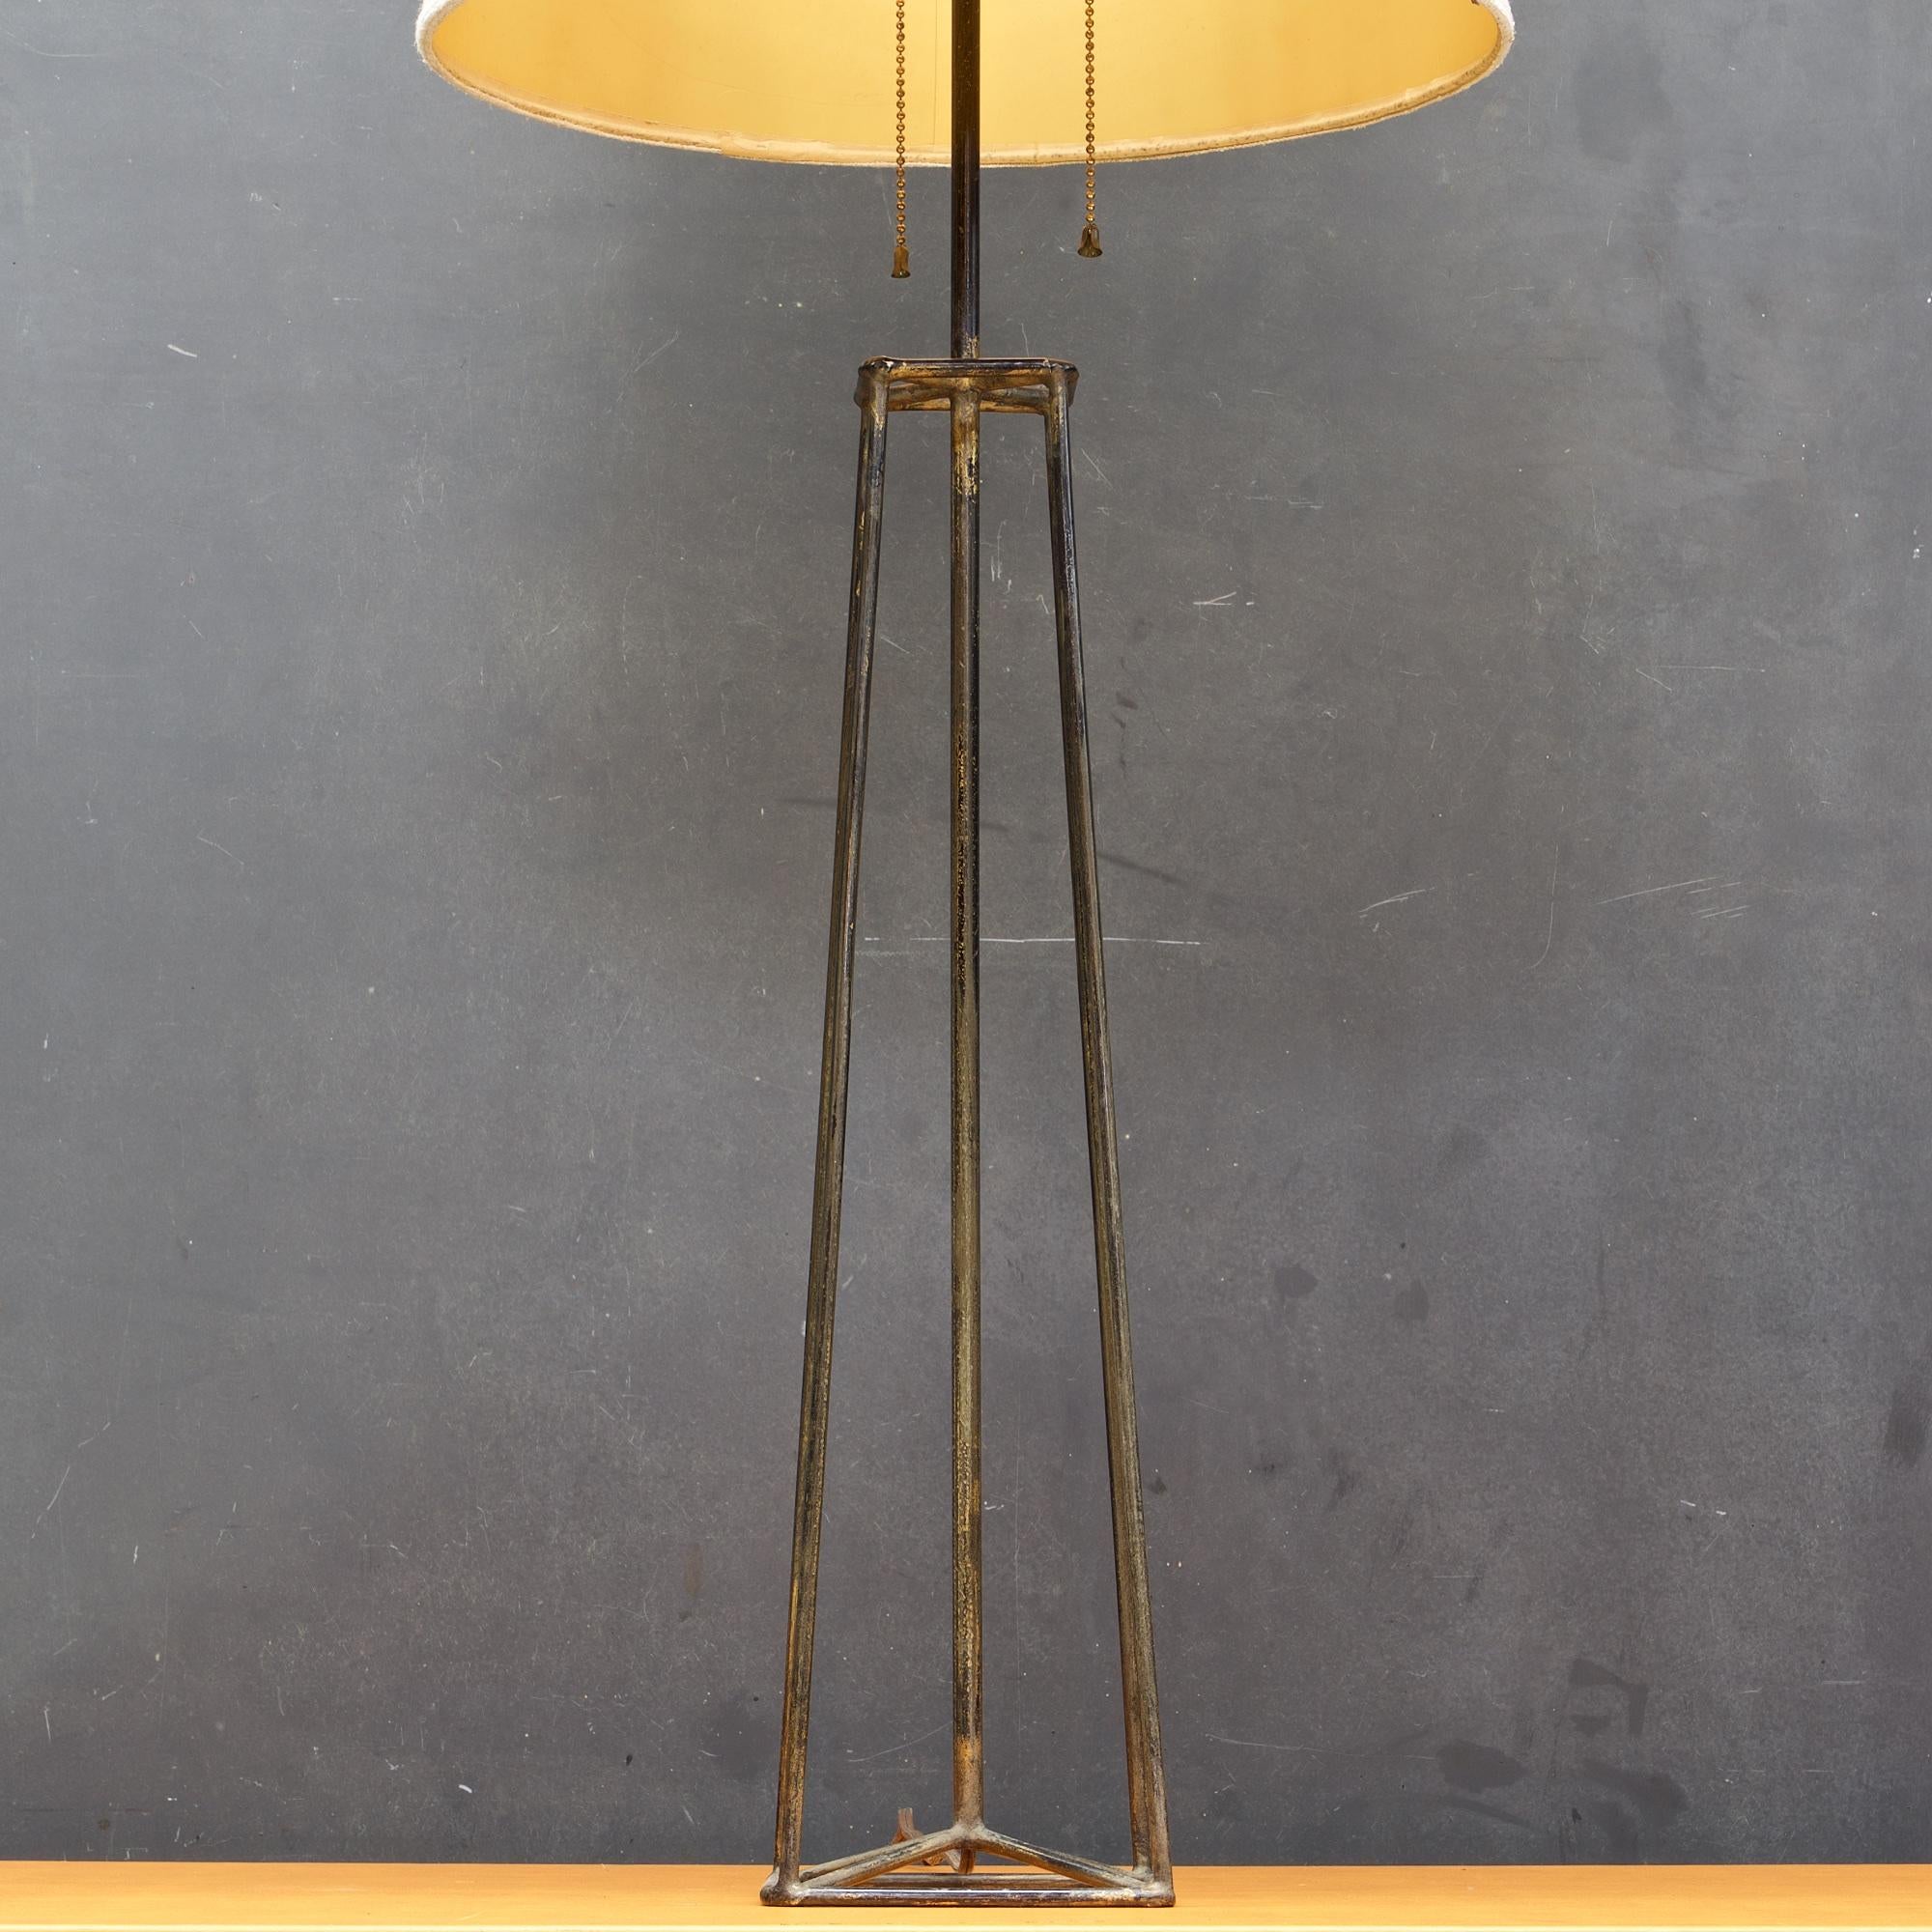 Harry Lawenda for Kneedler-Fauchere. Low production from the early 1950s. Made in San Francisco.

Black enameled Iron frame with a patina of a second paint job of gold paint and wear to original black finish.
Lamp body W 5.5 x D 5.5 x H 21 in.